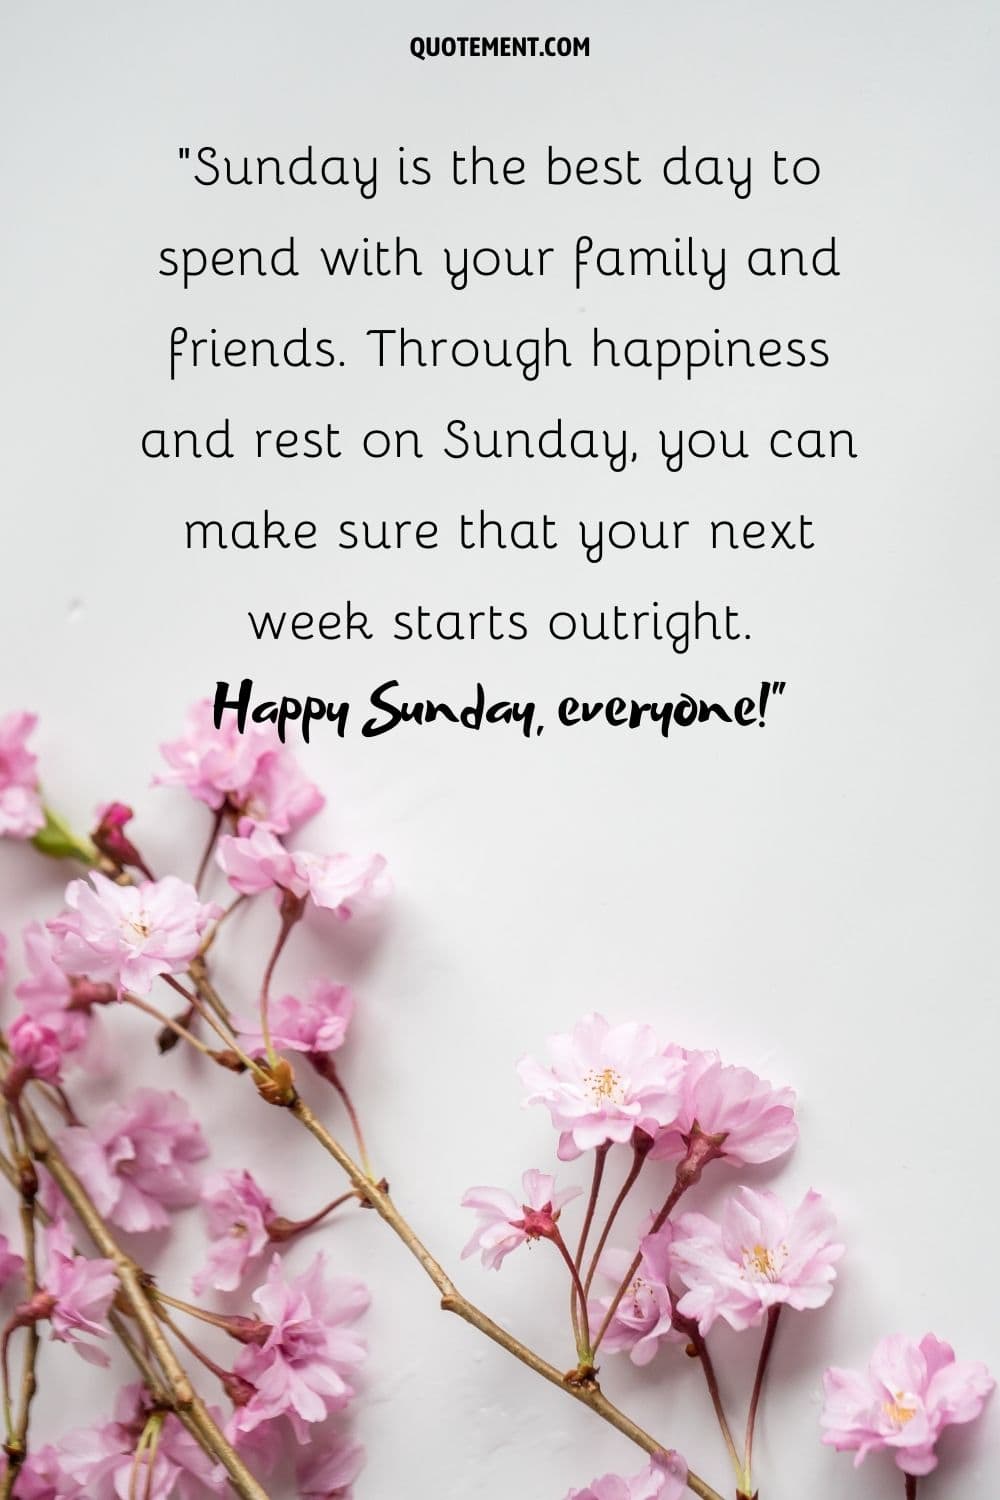 pink flowers on a branch representing sunday morning image and quote